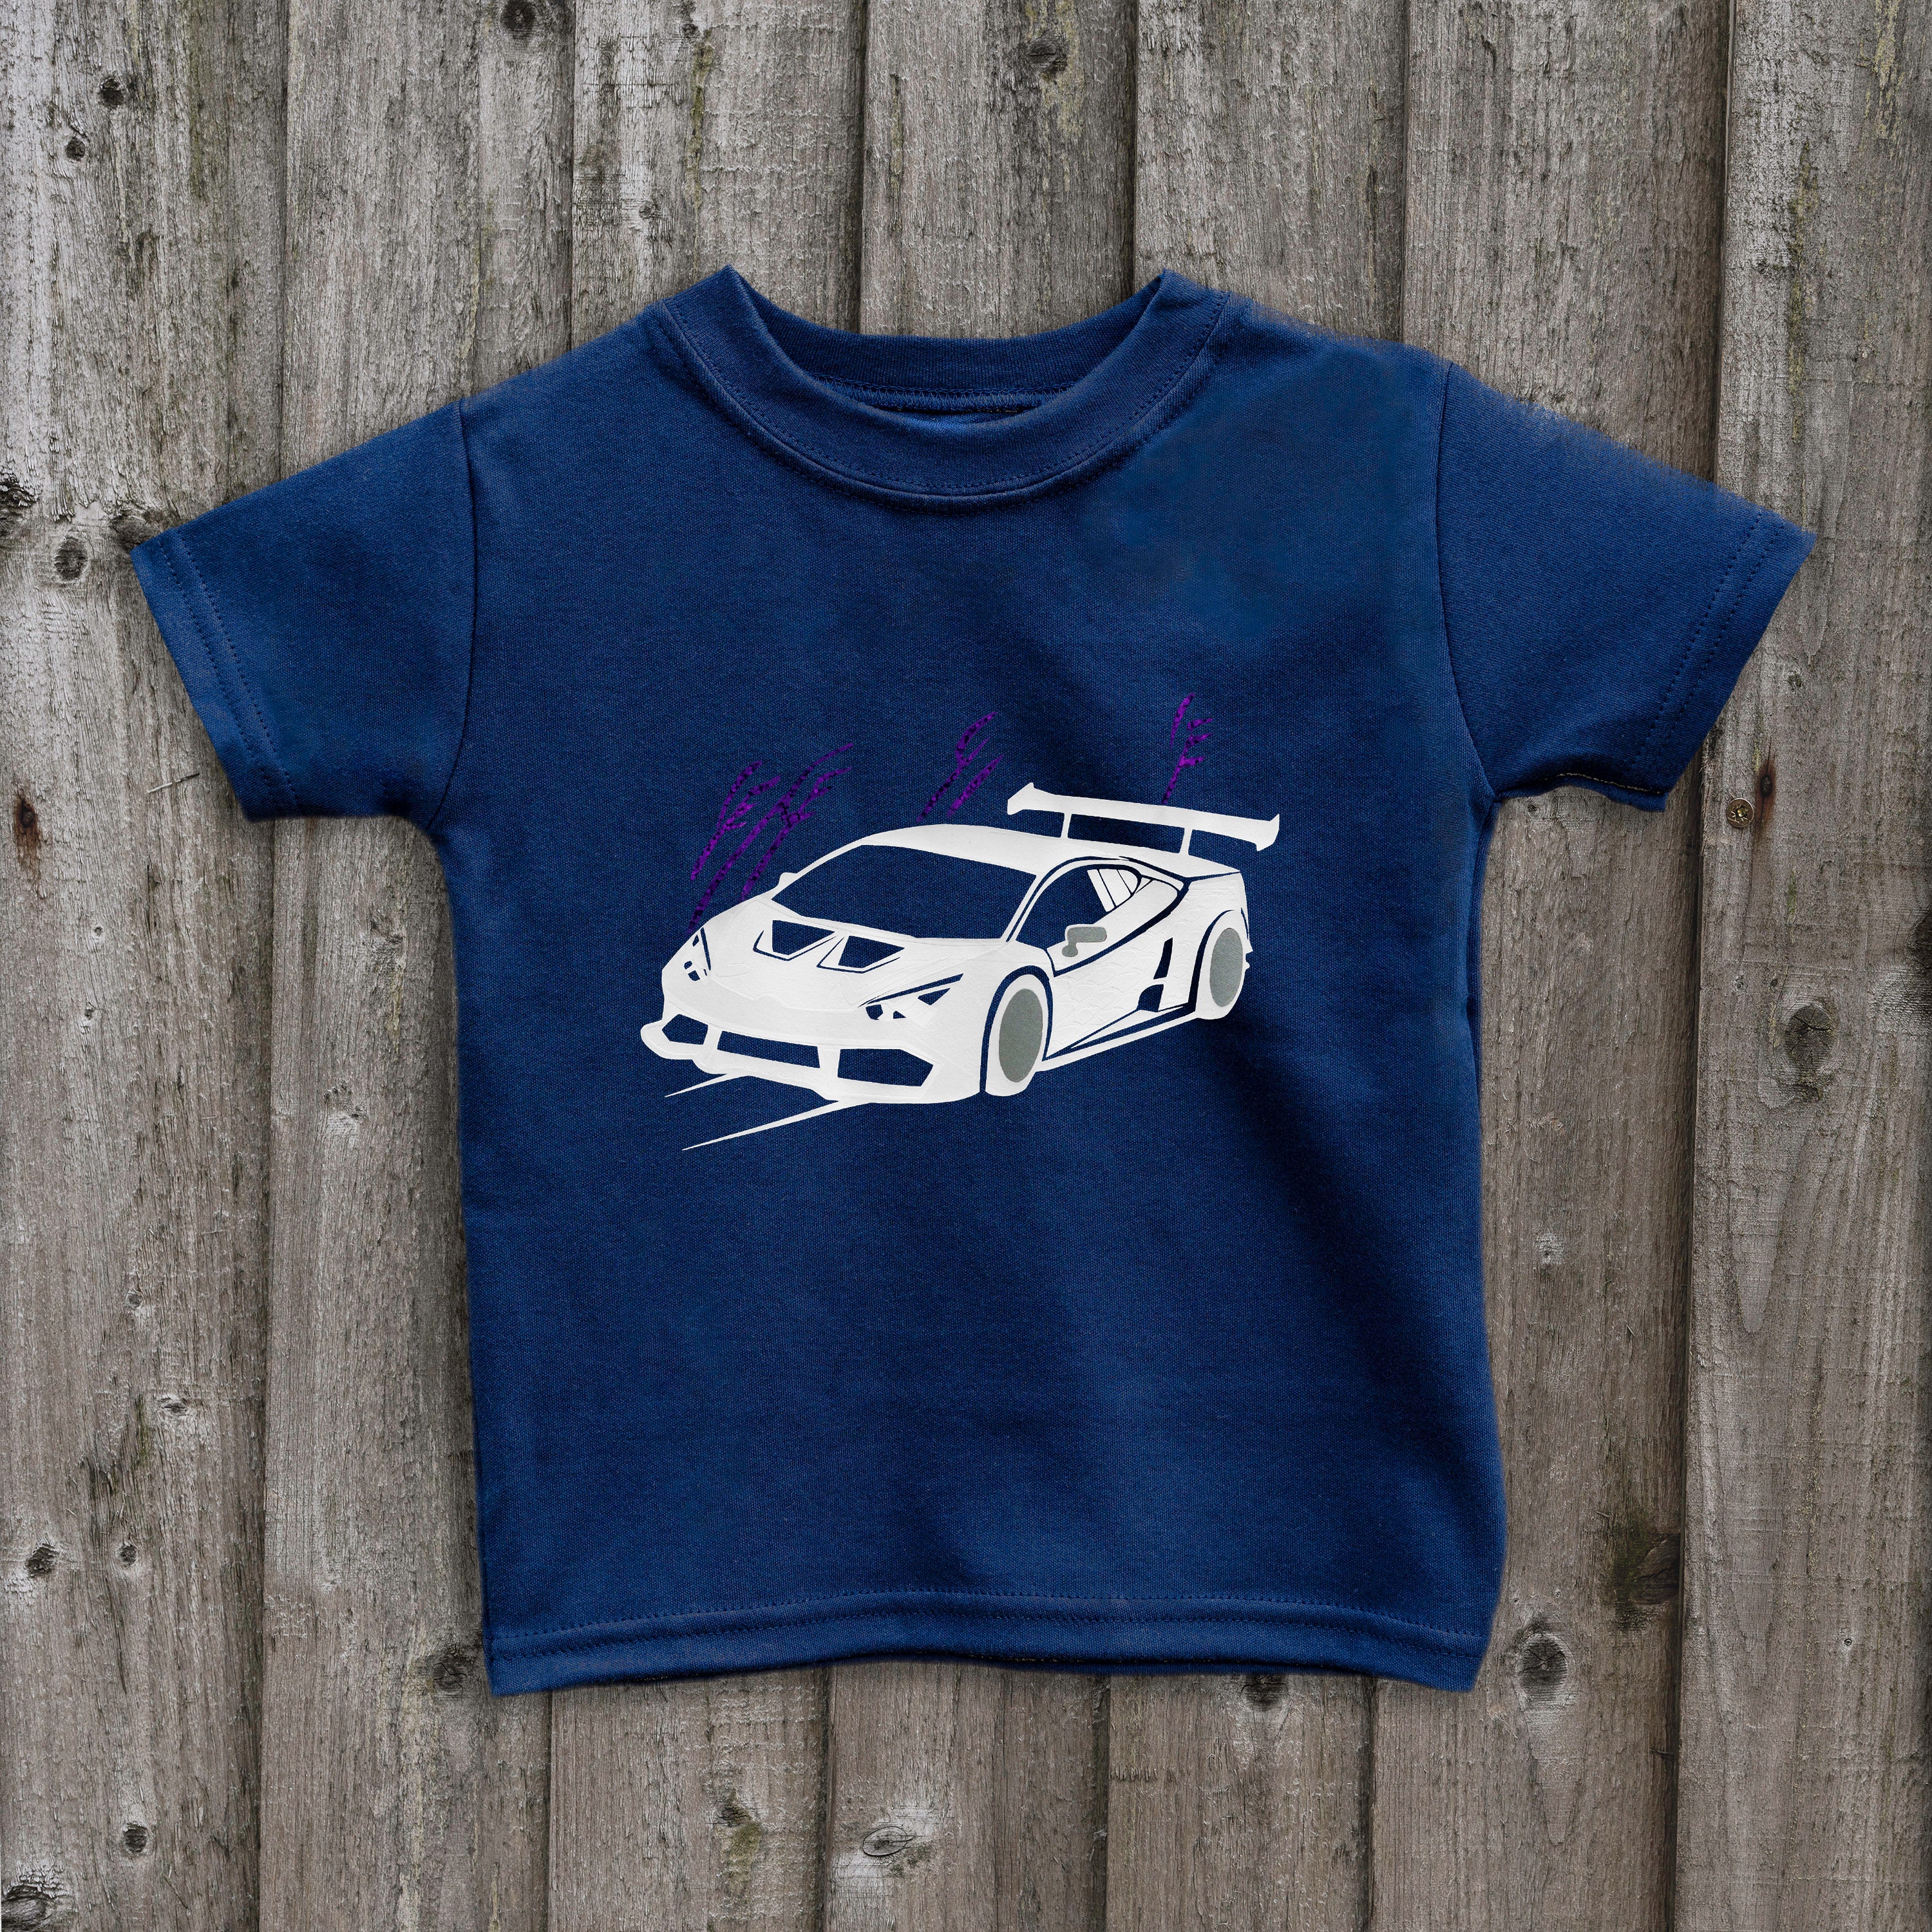 Sports Car T Shirt Kid Car Tops Kids Glow in the Dark Clothing Boys  Presents Fast Cars Handmade Car Tees Great Gifts for Boys Uk Transport -  Etsy